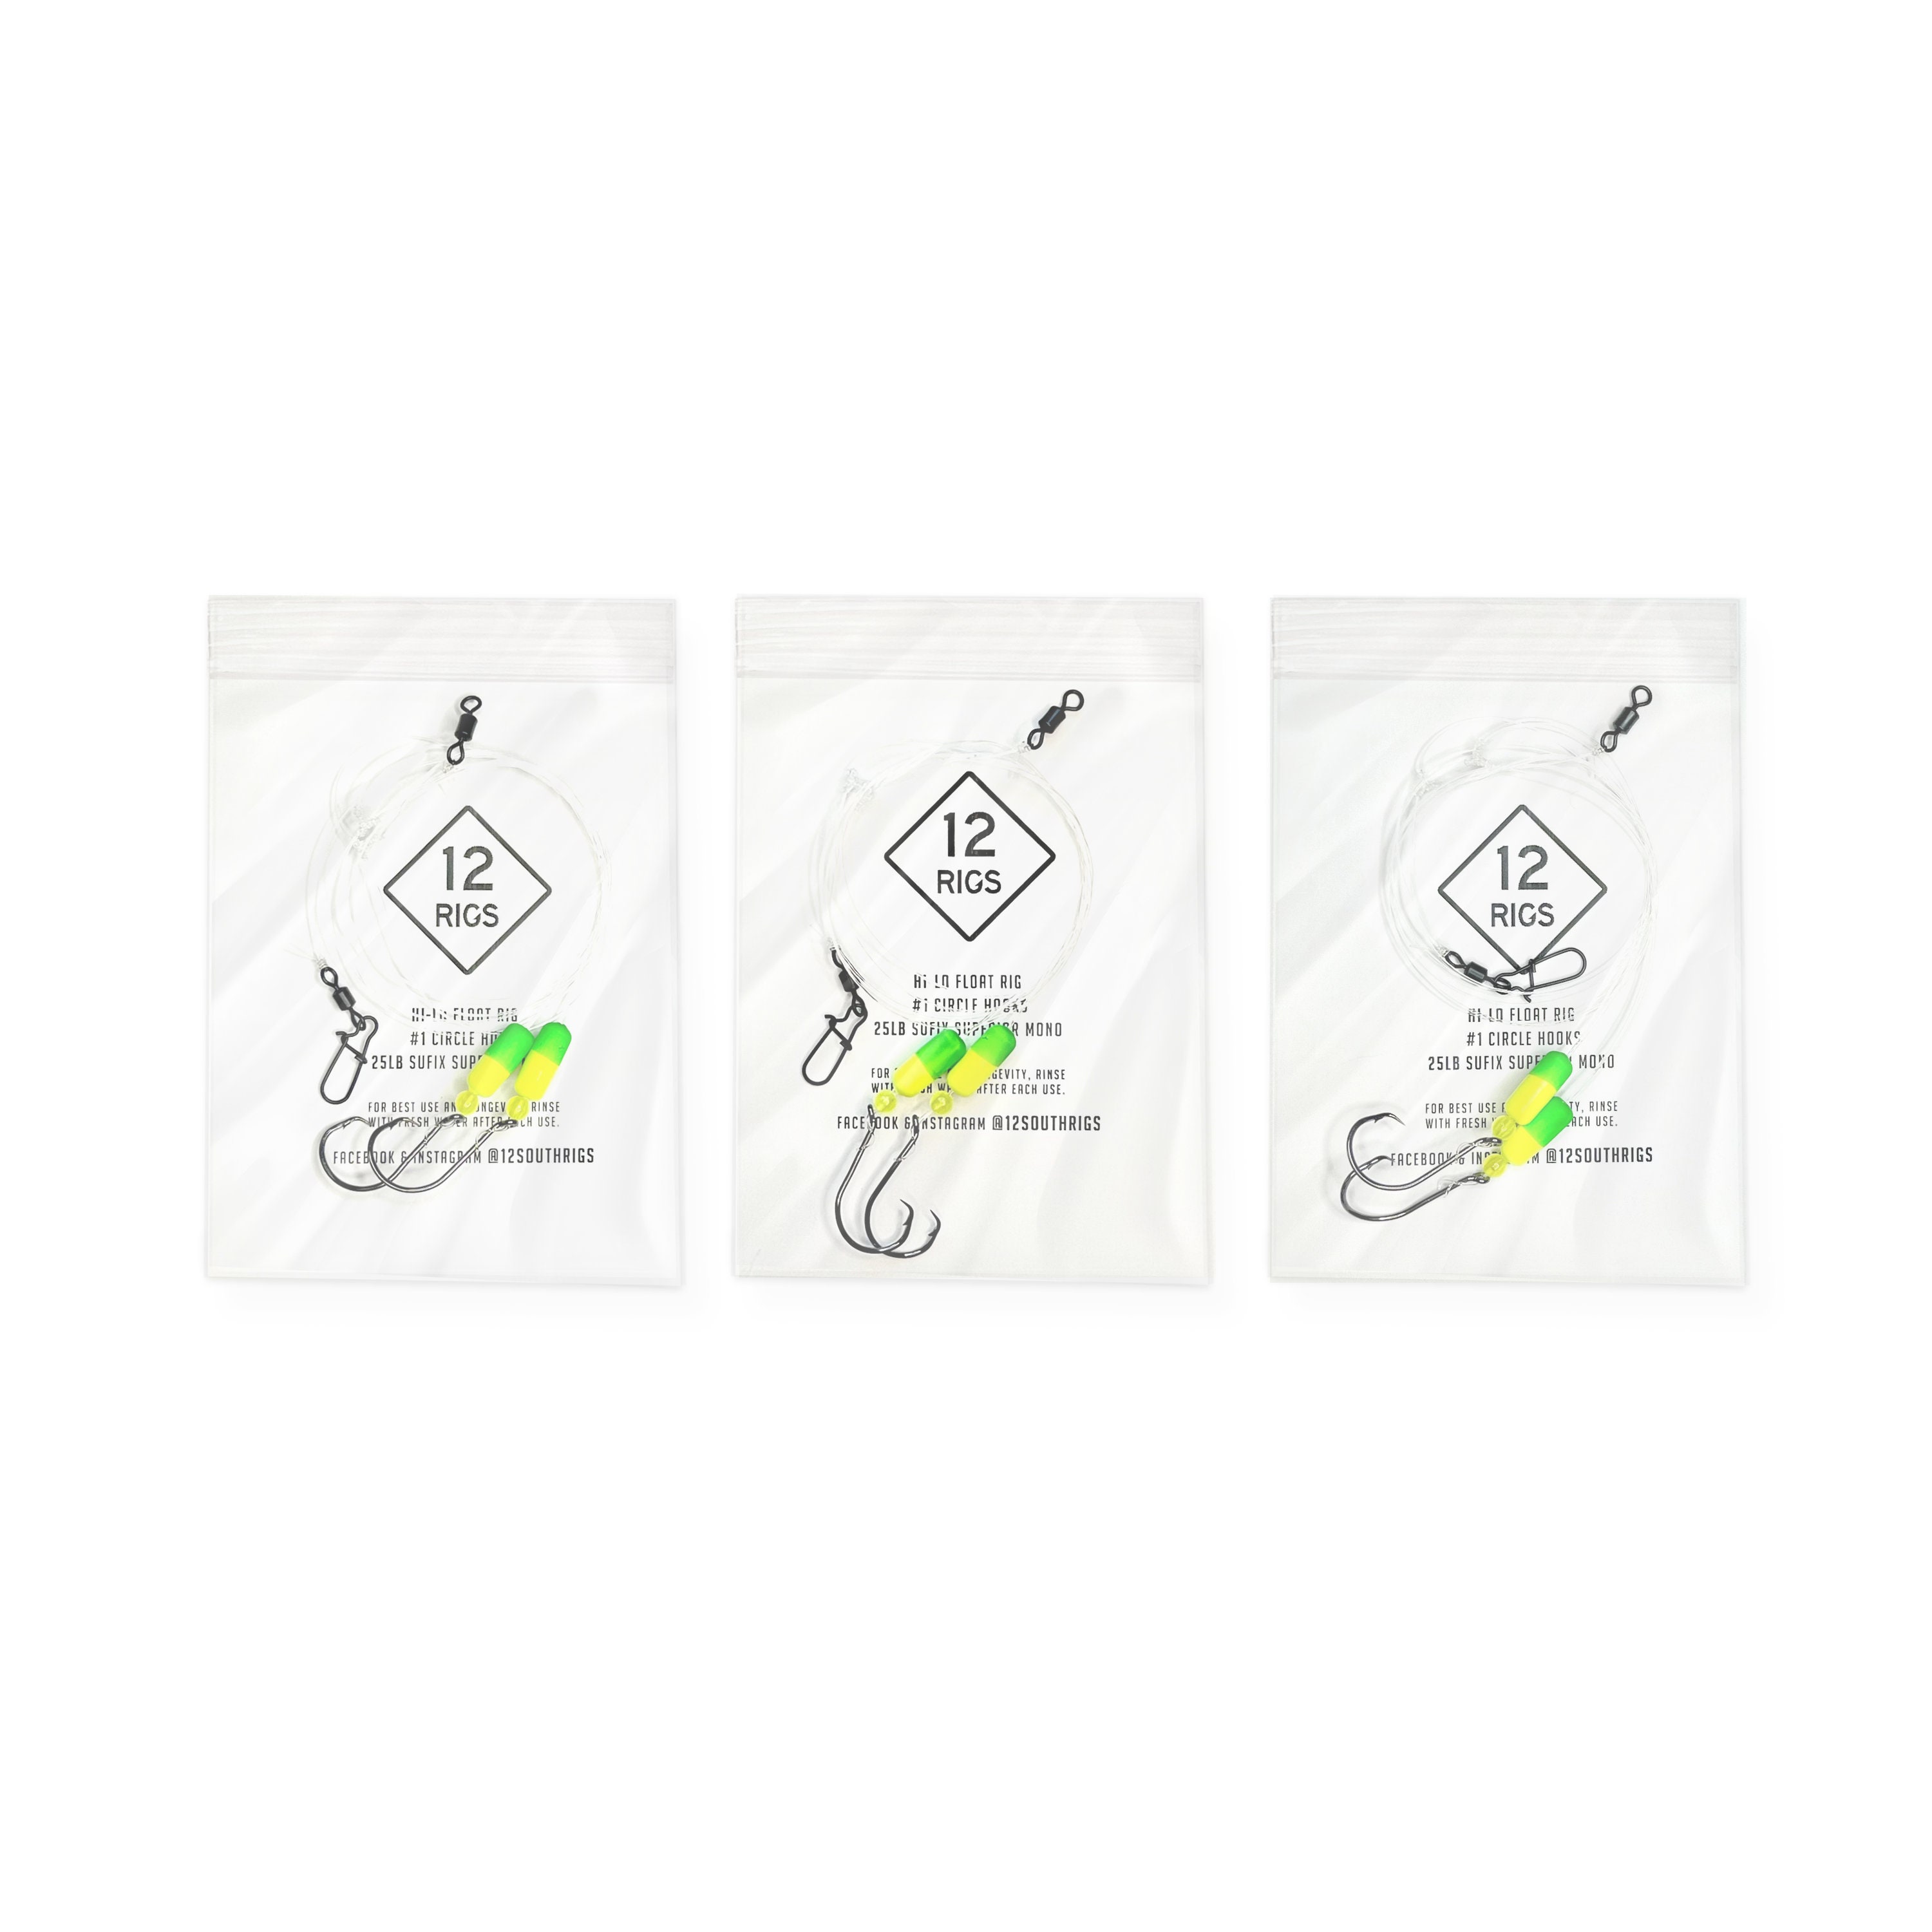 3 Pack '1' Pompano Rig Beach/pier/surf Fishing Rigs 1 Circle Hook 25 Mono  Hand-tied With T-knot Choose Between 6 Colors -  Hong Kong